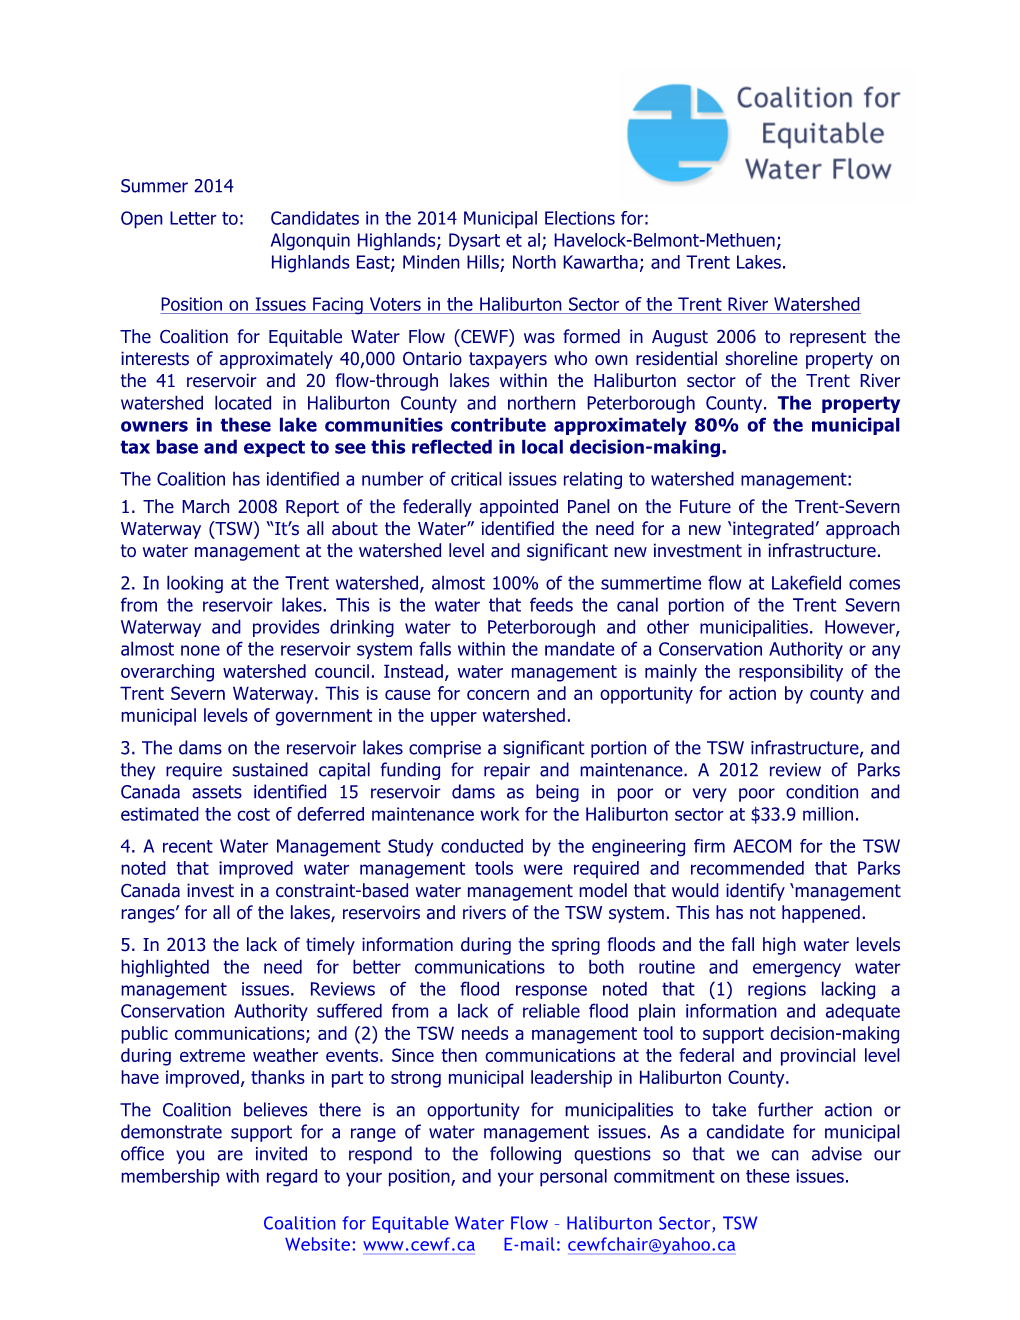 Coalition for Equitable Water Flow – Haliburton Sector, TSW Website: E-Mail: Cewfchair@Yahoo.Ca Questions from the Coalition 1